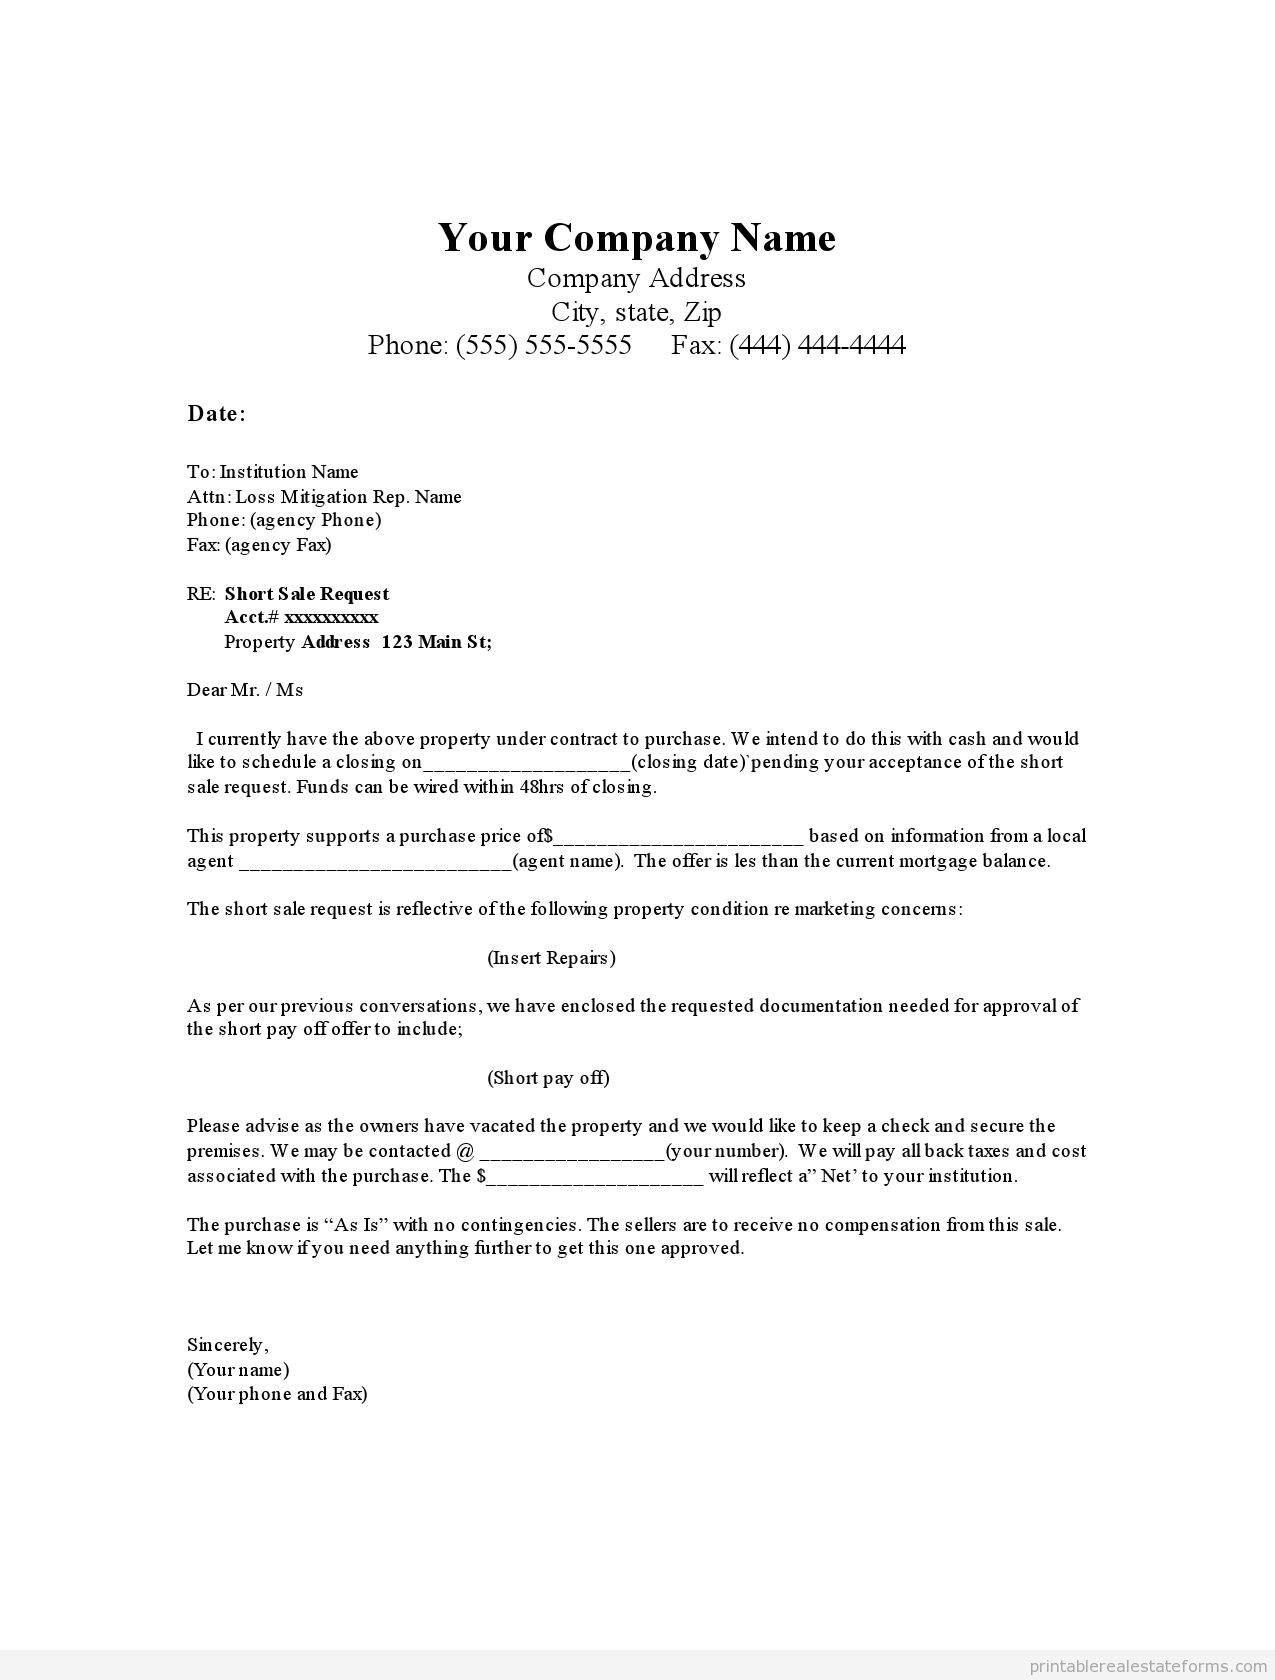 Letter Of Offer to Purchase Property Template - 24 Elegant Agreement Letter Sample for House